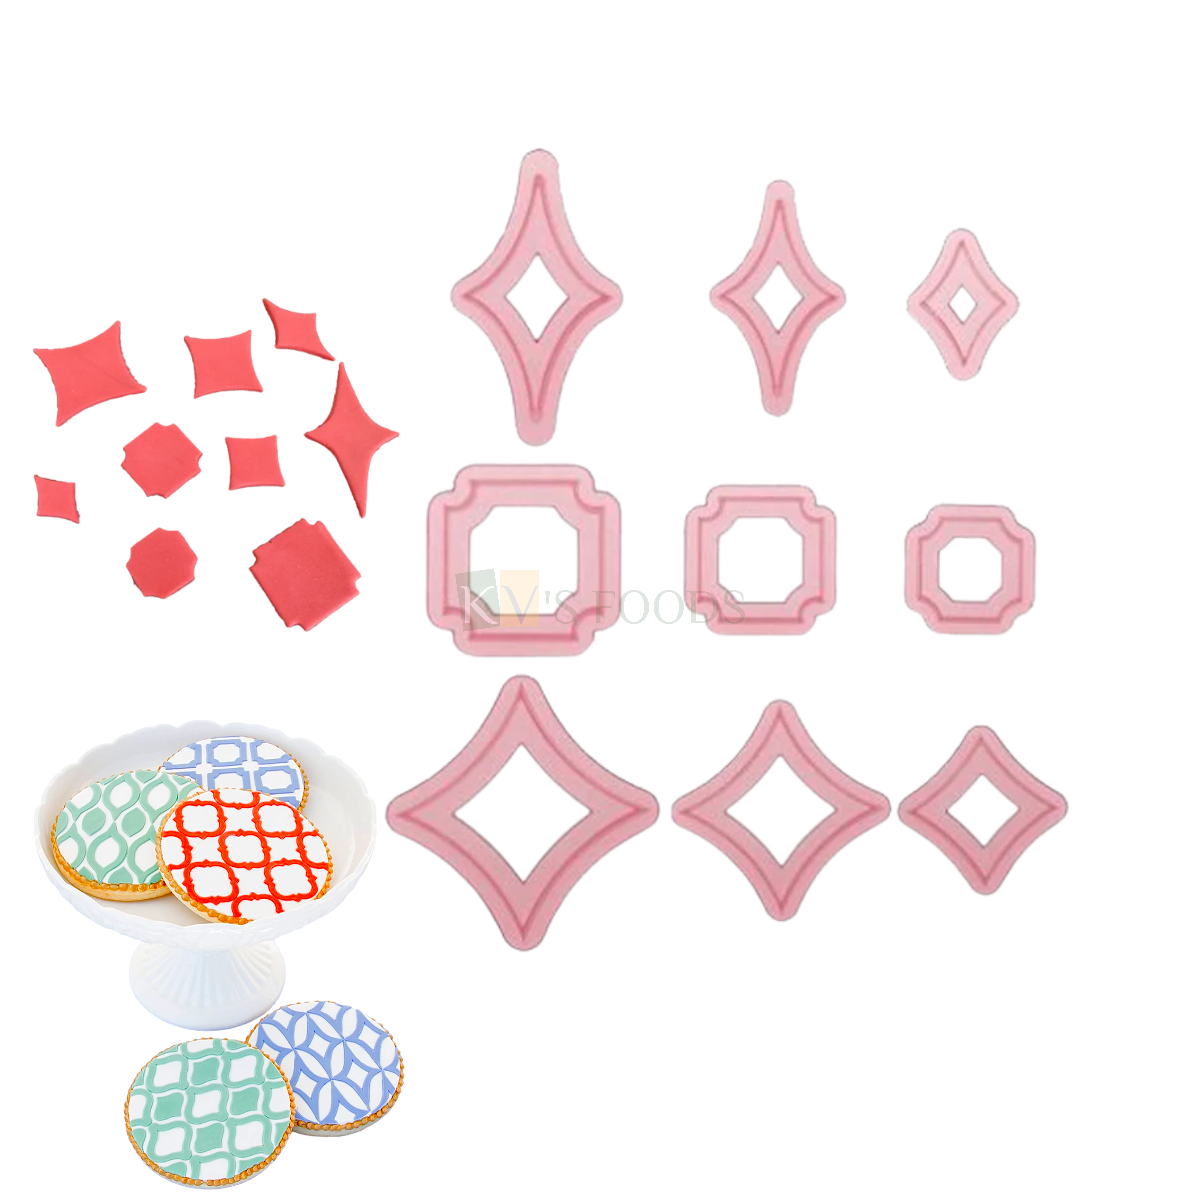 12 PCS Pink Teardrop Element Curved Square Set Cutters Stamps, Plunger Molds Embossing Mold Printed Presses Impression, Chocolates Cookies Cutter Kids Girls Boys Mathematics Happy Birthday Theme